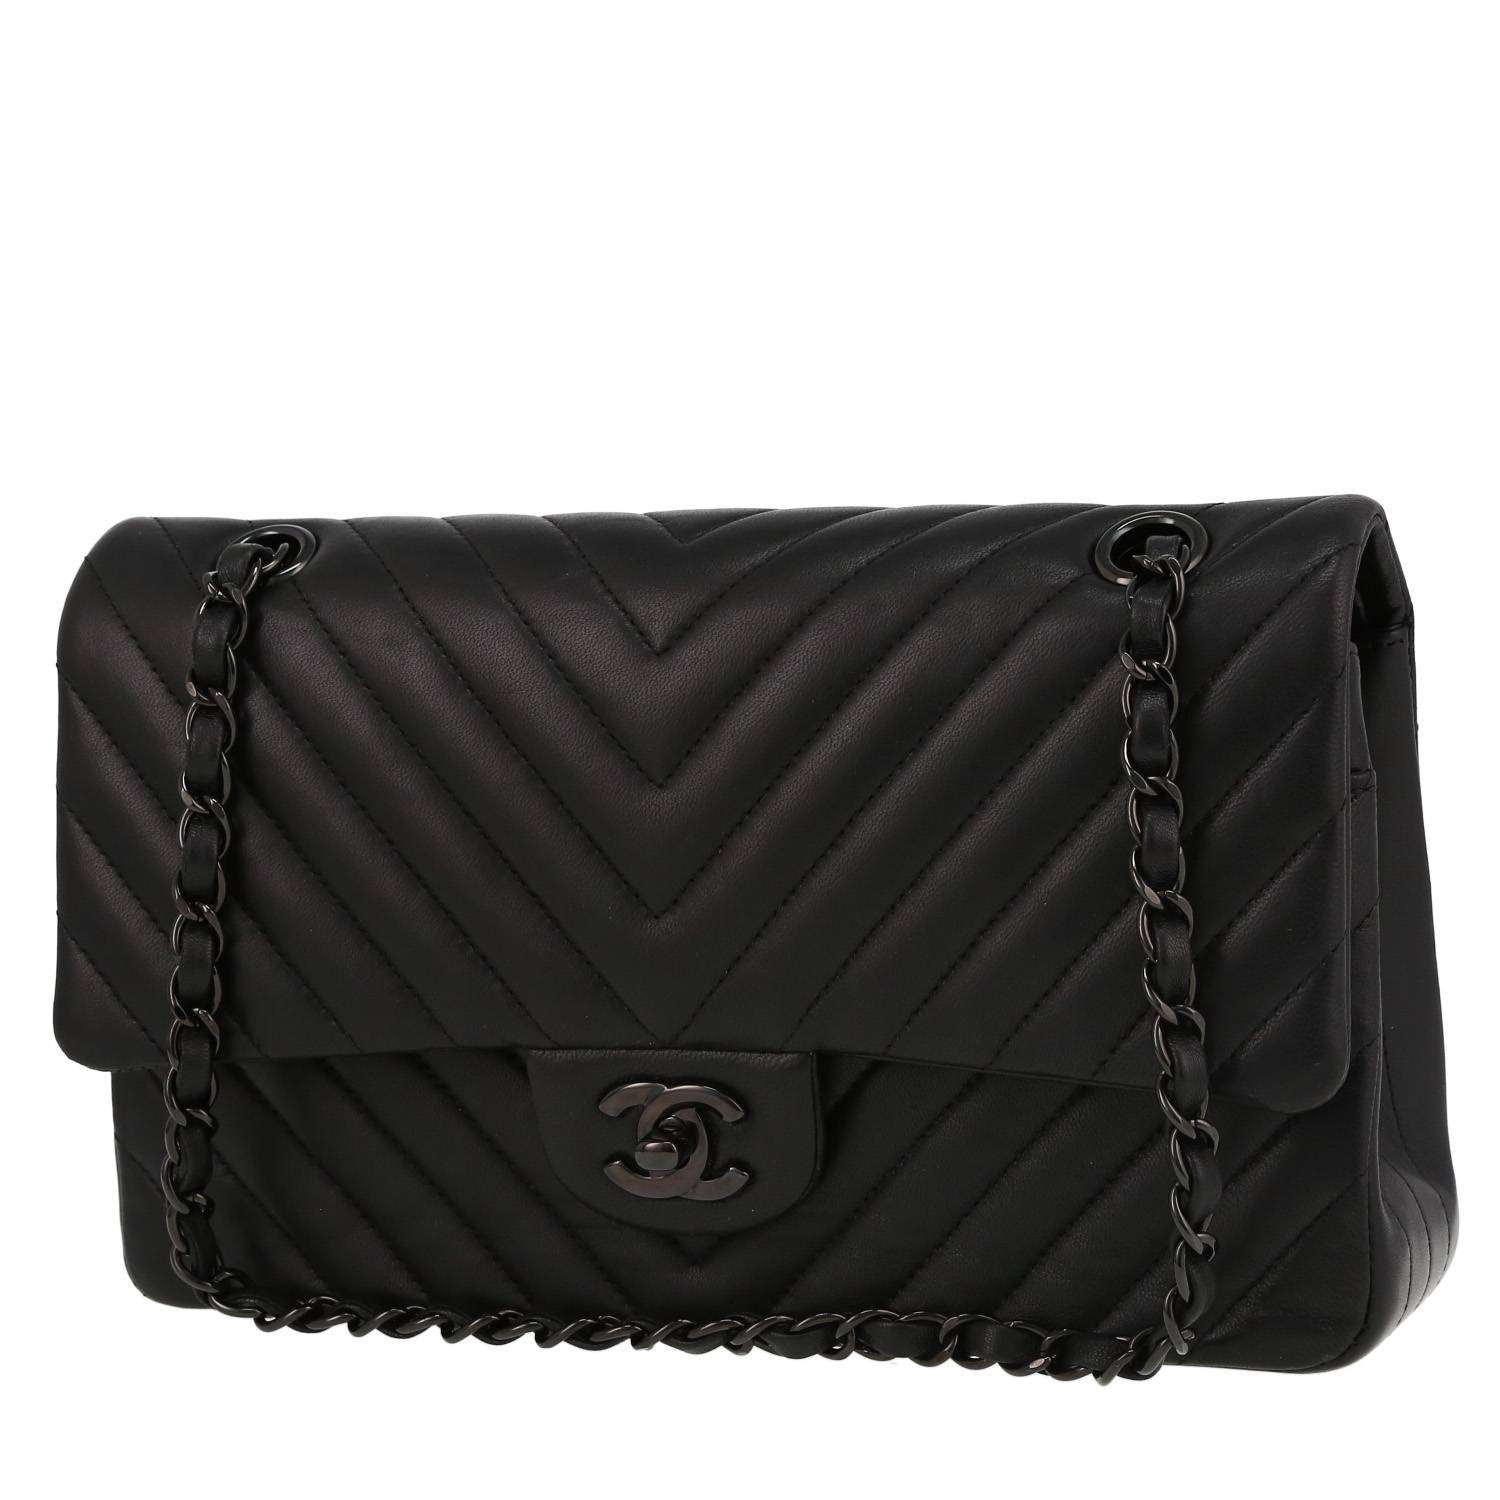 Chanel Timeless handbag in black quilted leather